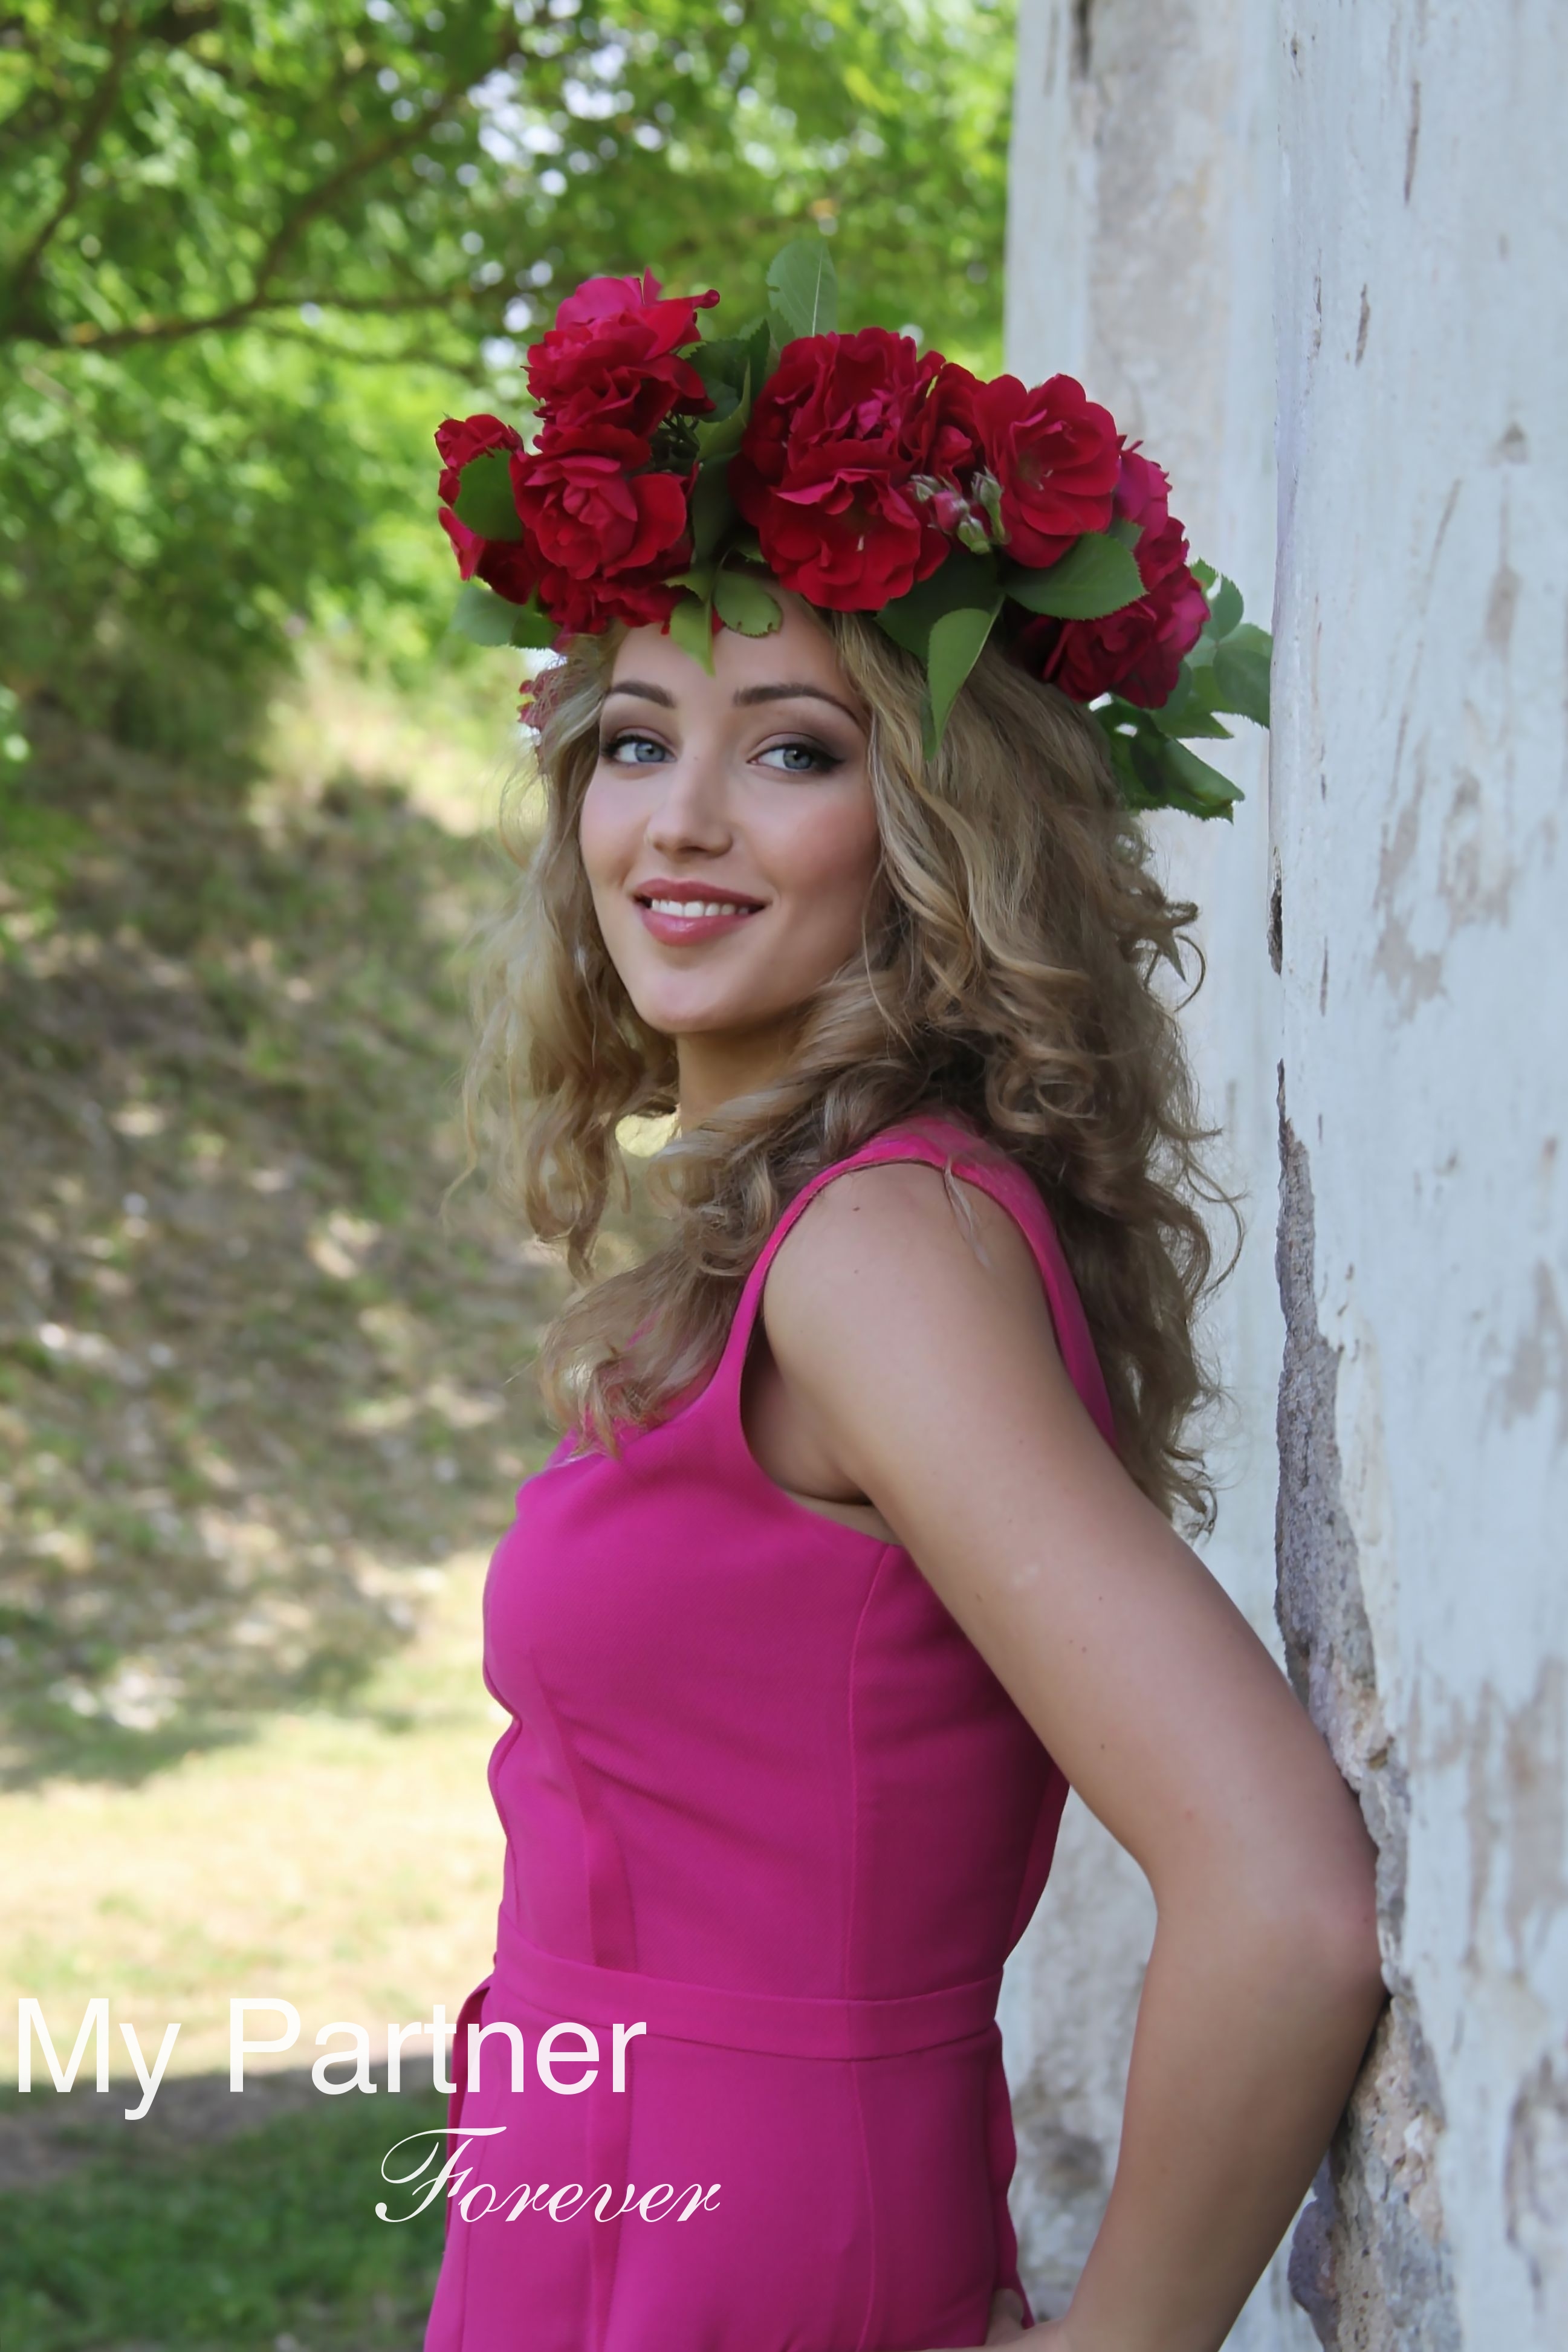 Dating Site to Meet Stunning Russian Lady Alina from Almaty, Kazakhstan